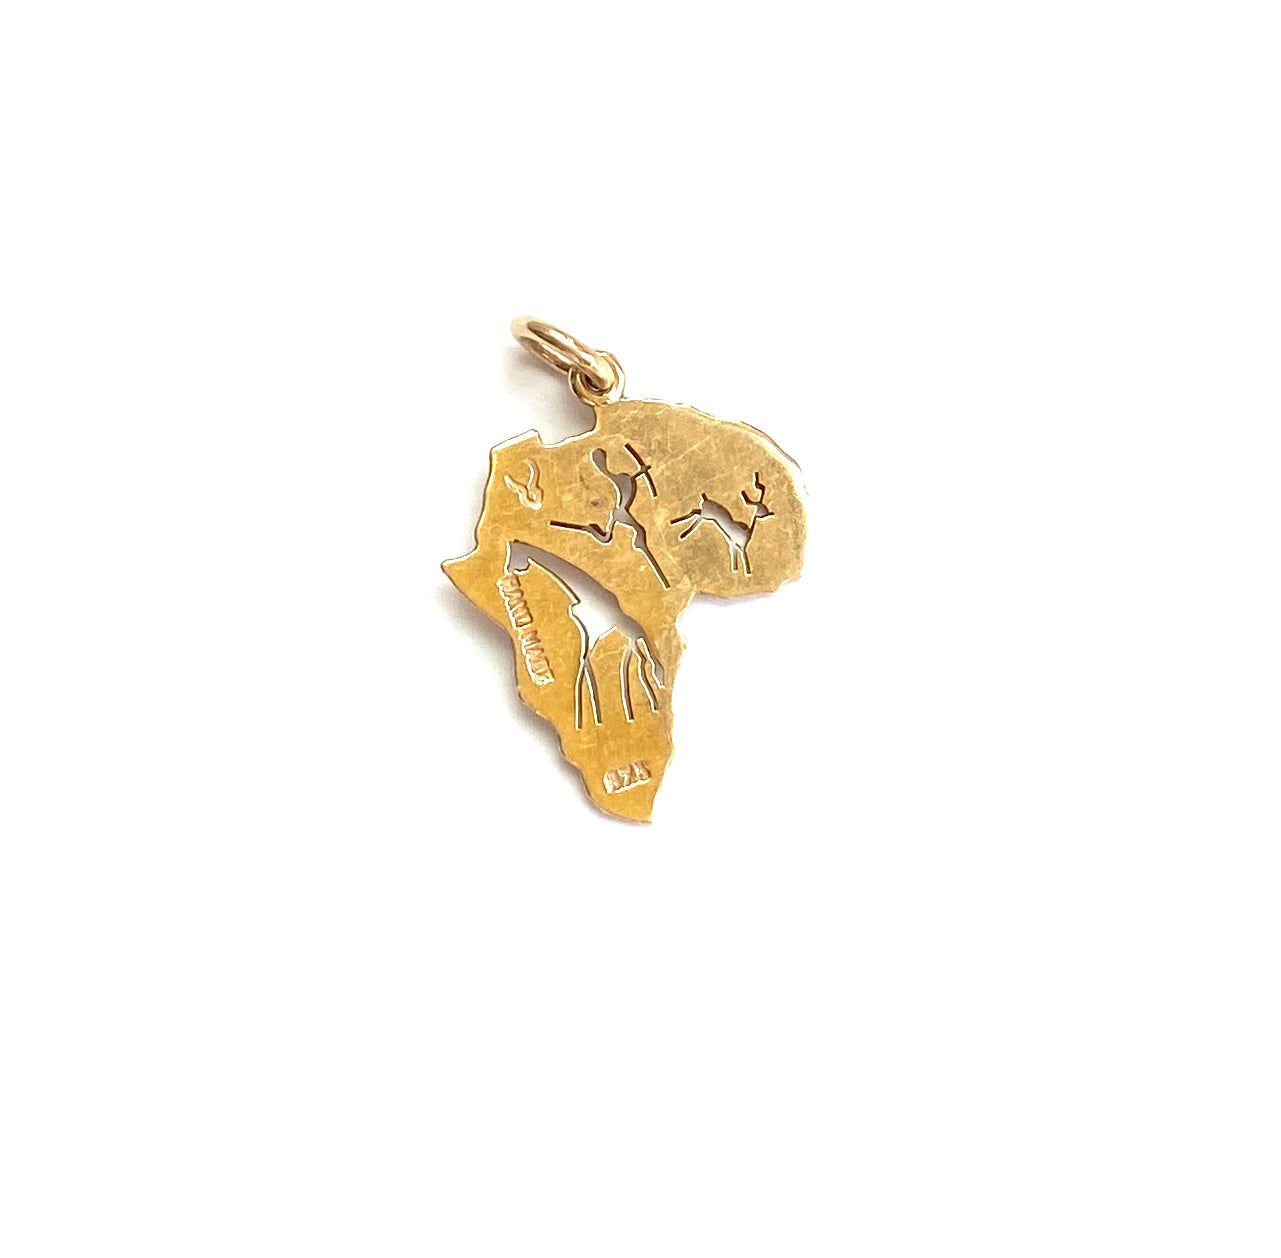 9ct gold hand made Africa pendant / charm